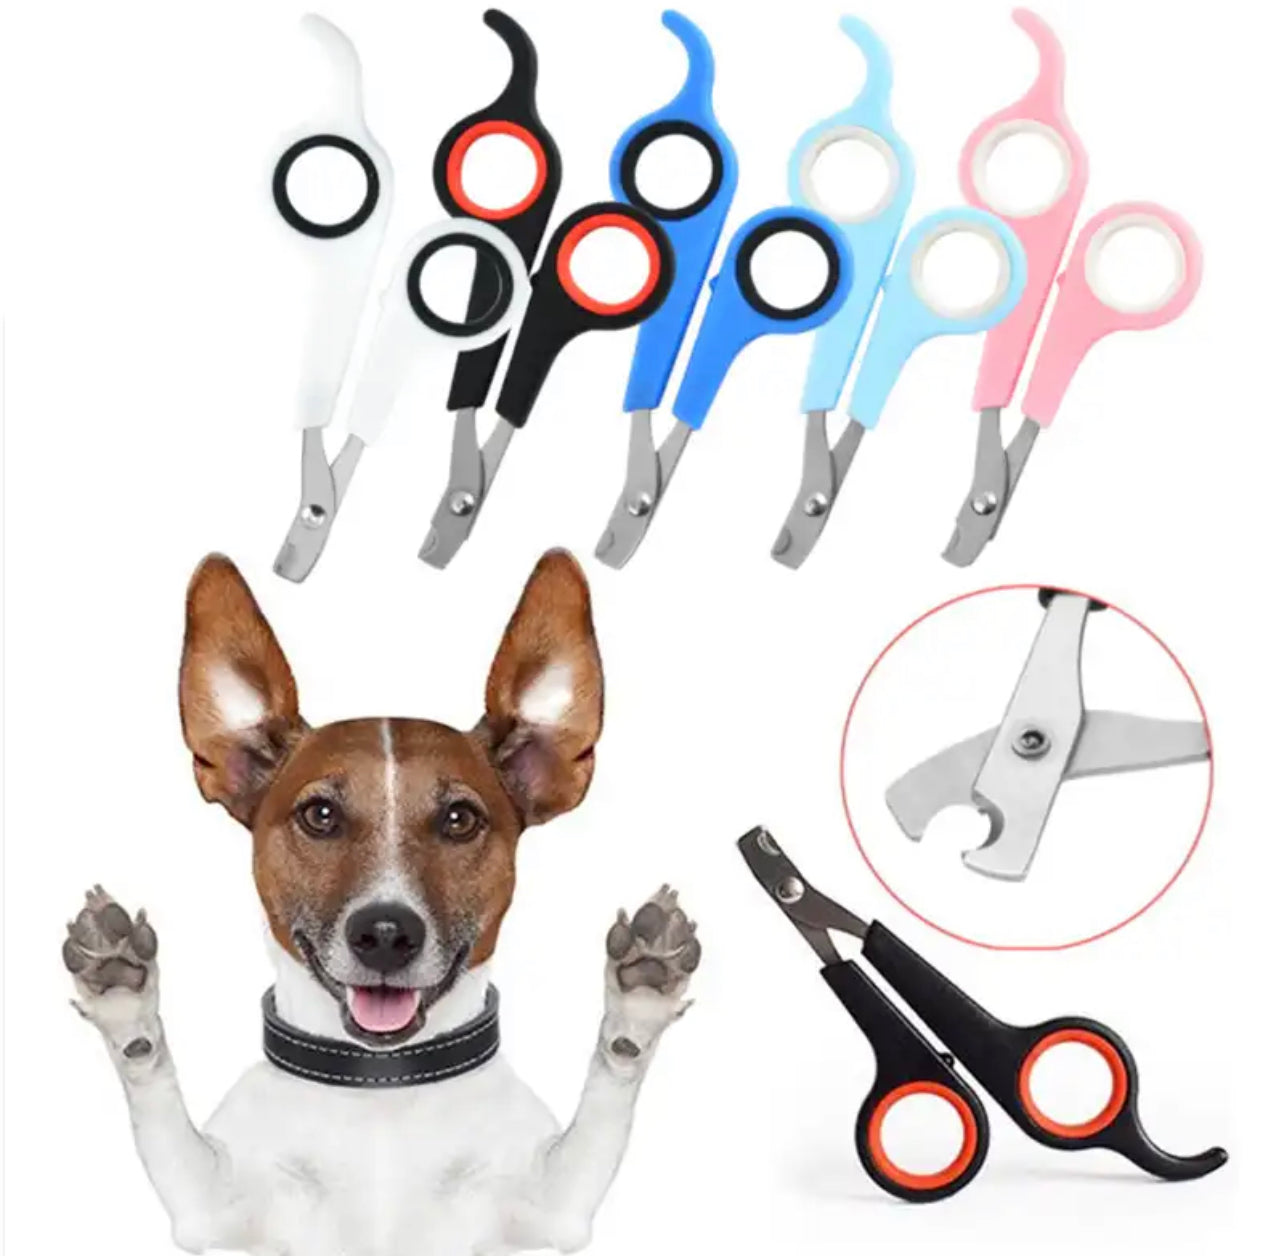 Small Scissor Style Nail Clippers Chihuahua Small Dogs Black and Red